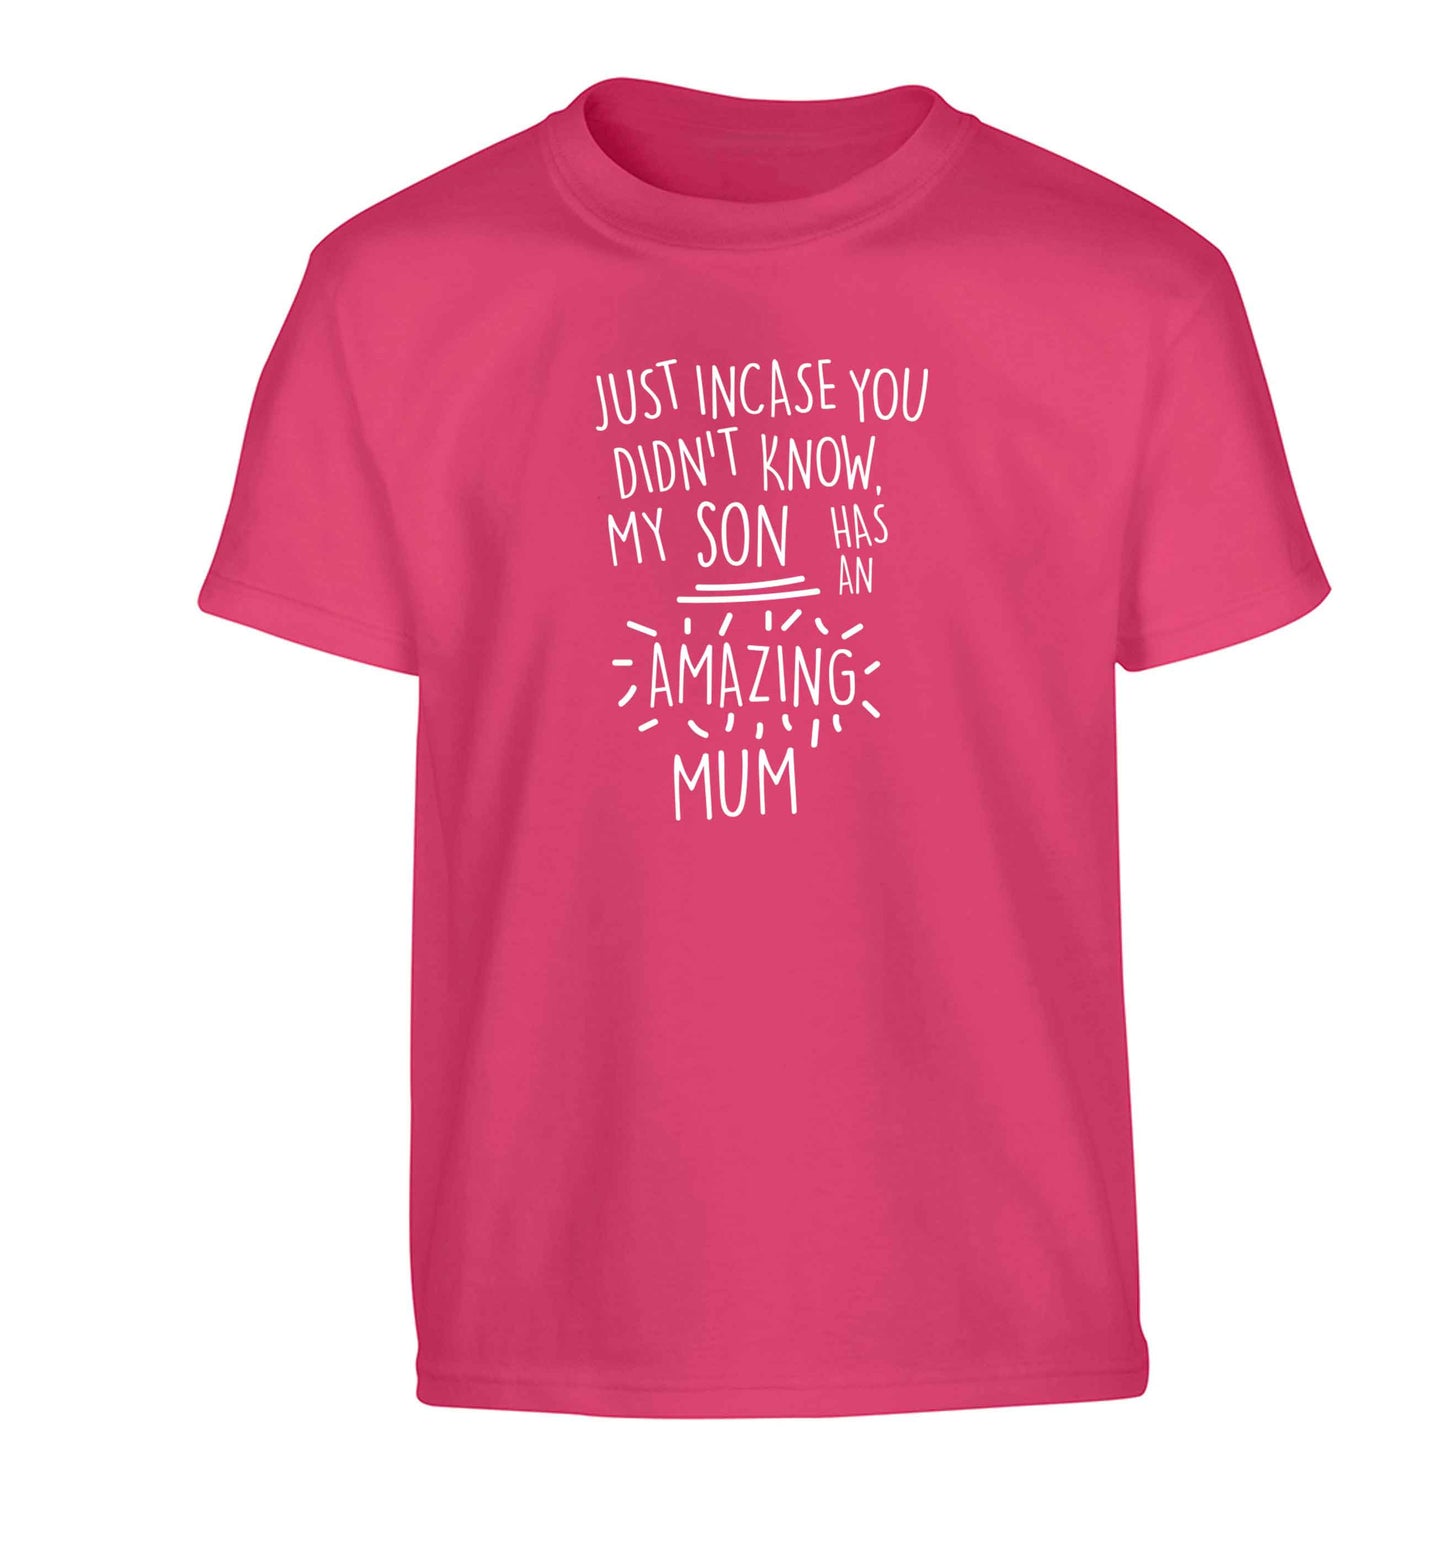 Just incase you didn't know my son has an amazing mum Children's pink Tshirt 12-13 Years